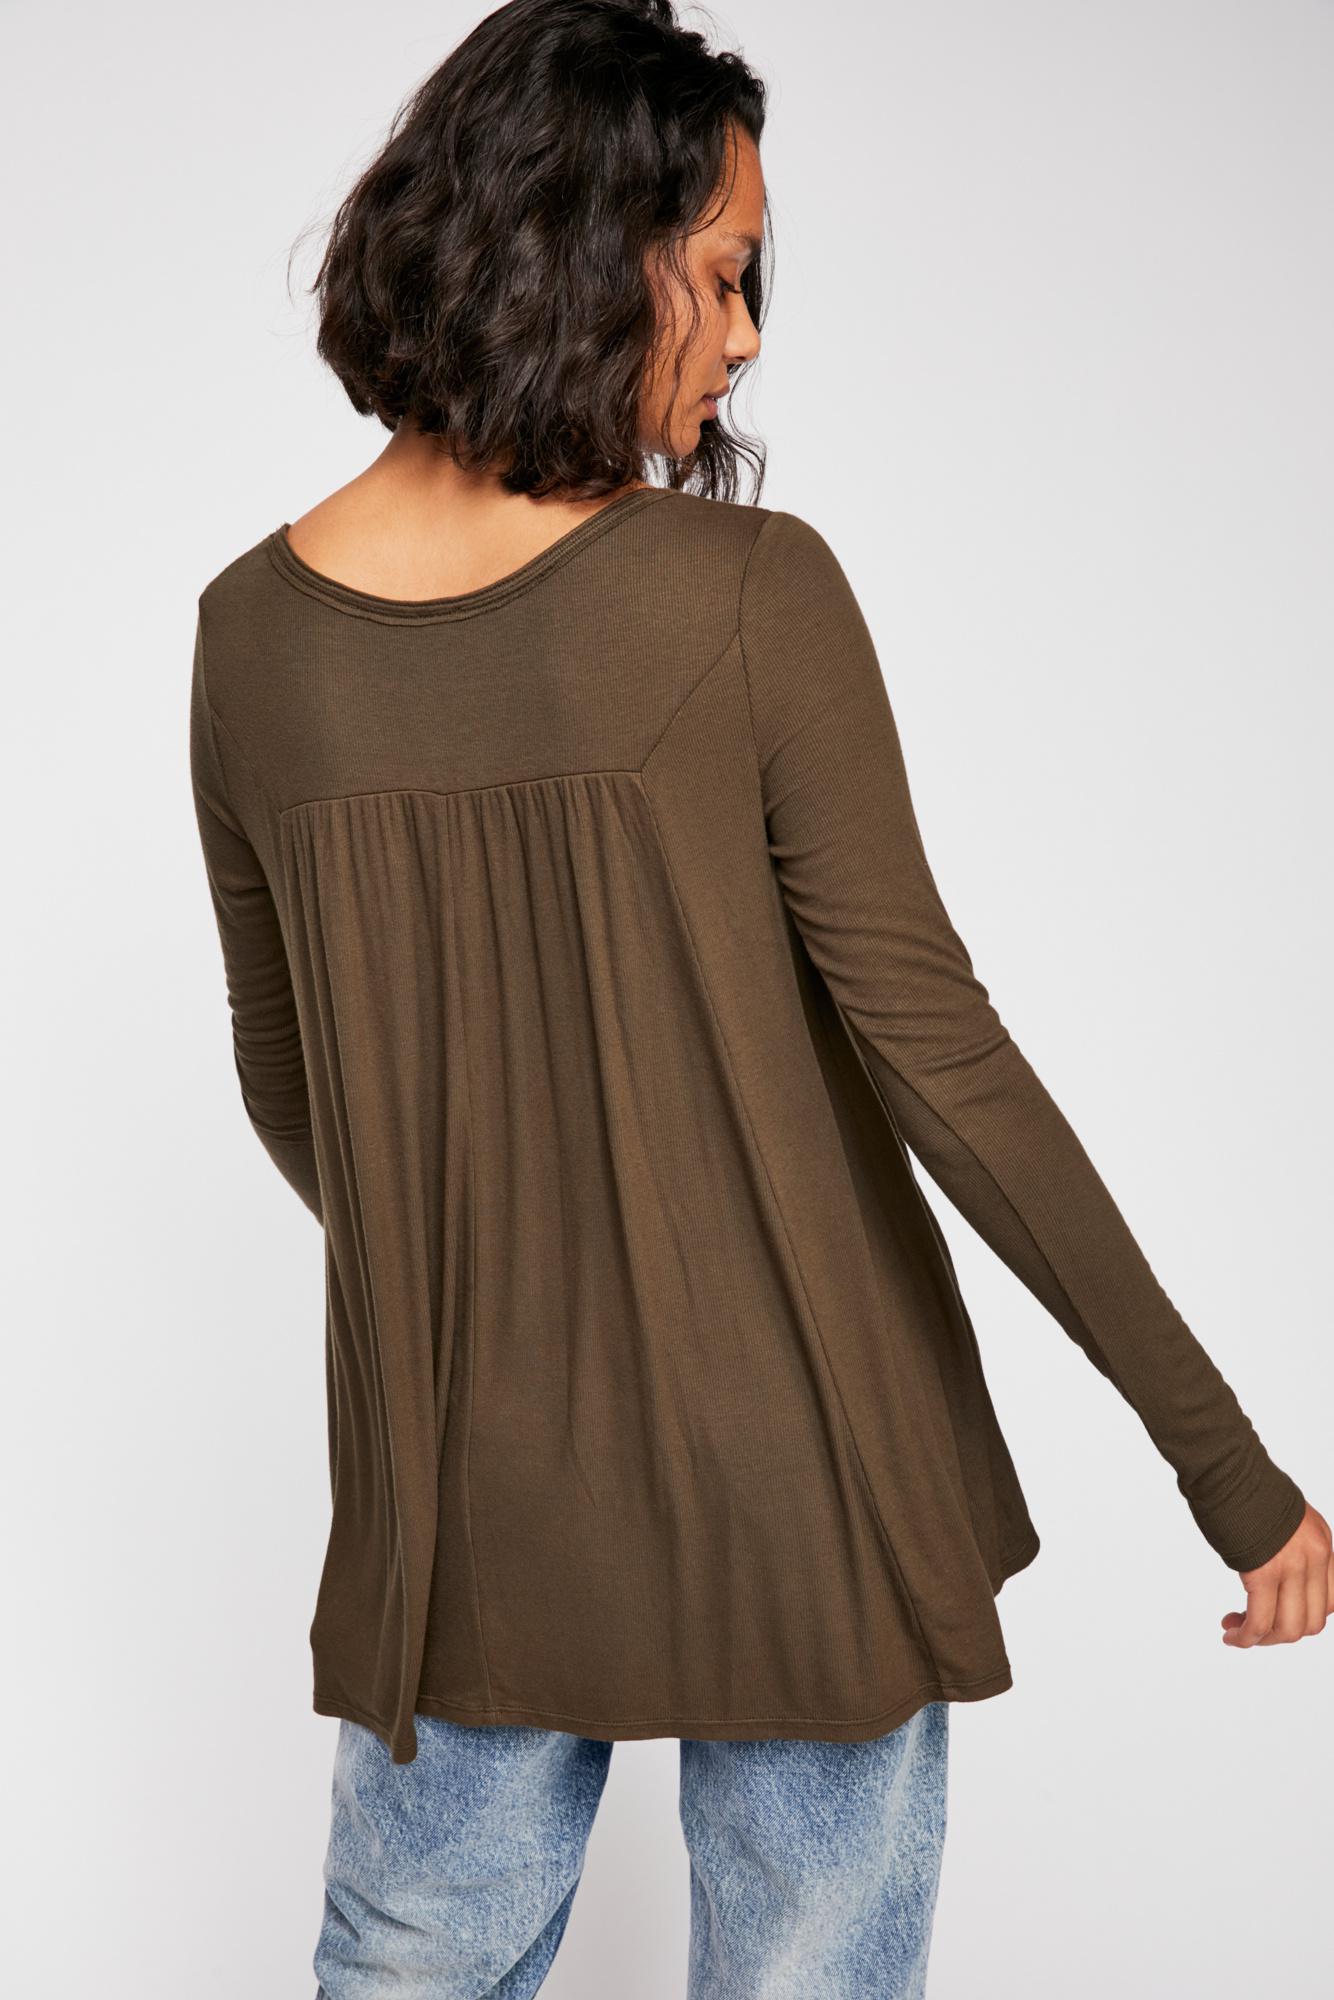 Free People Synthetic We The Free Love Valley Long Sleeve Top in 